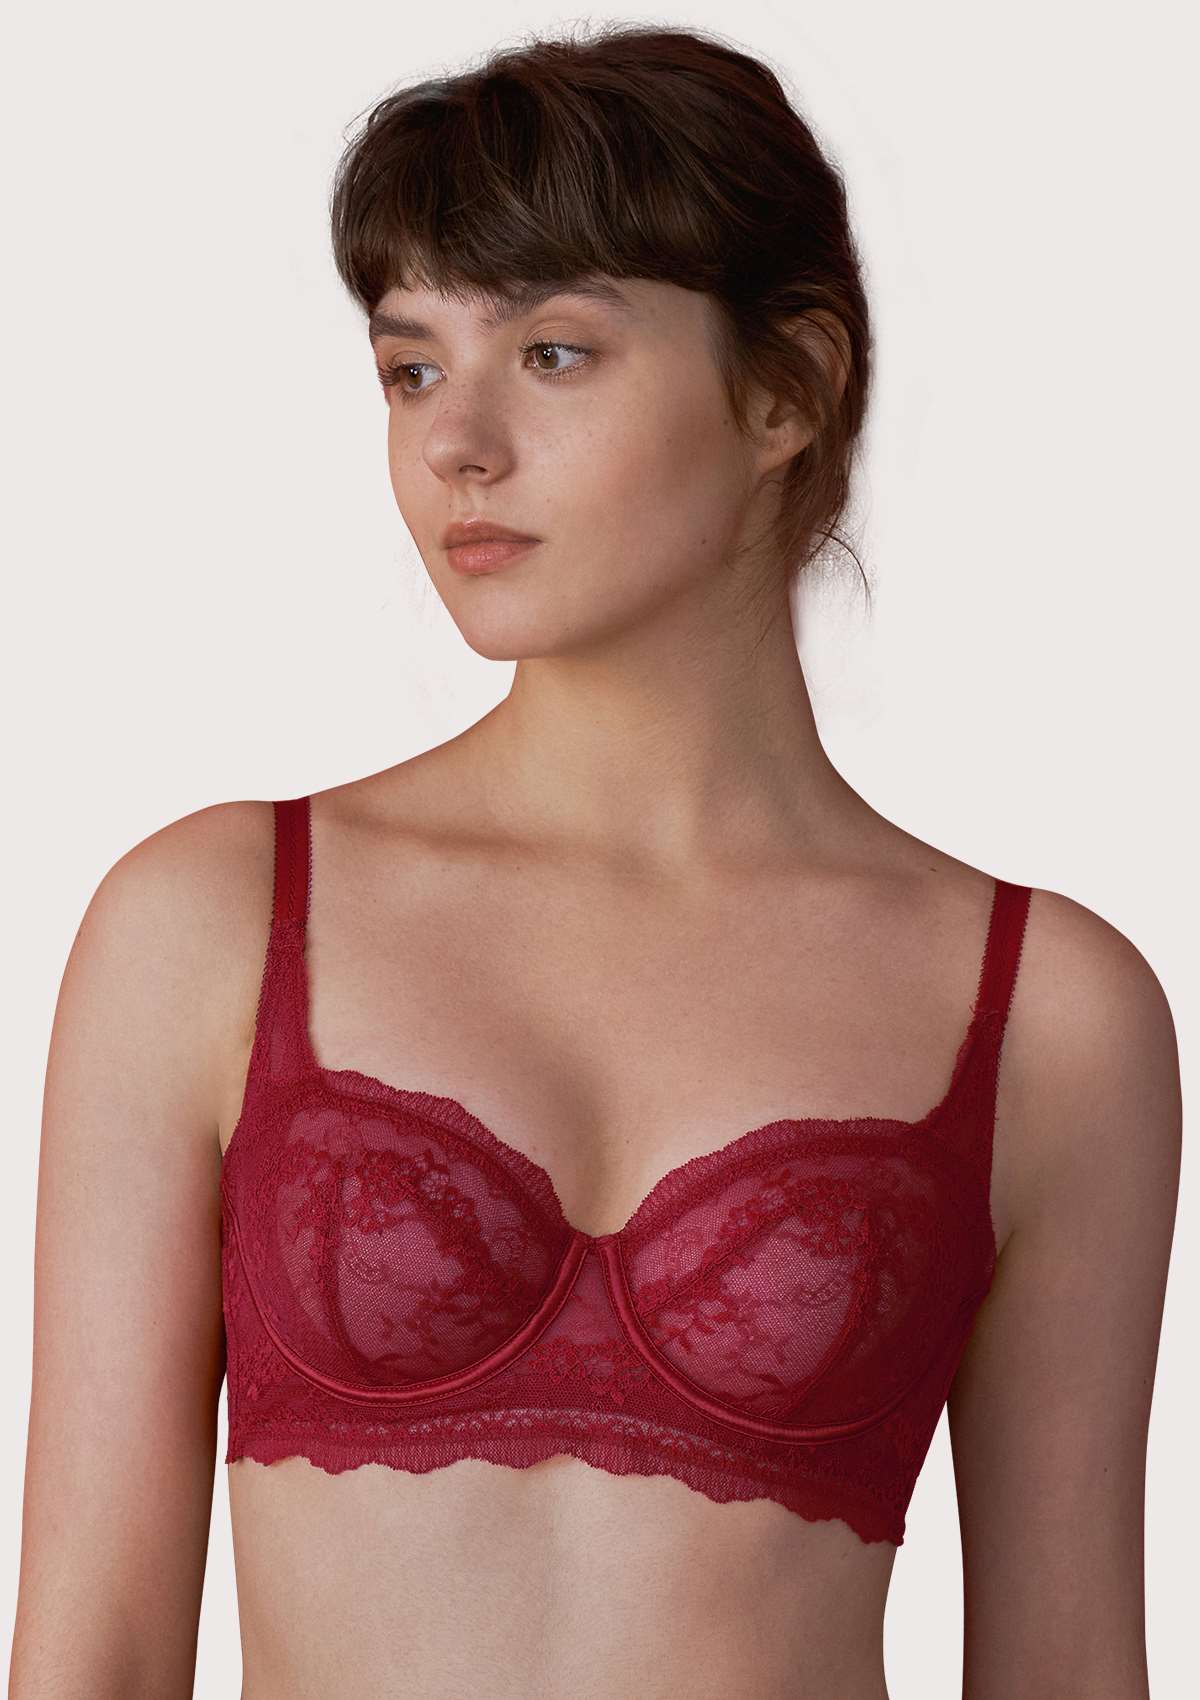 HSIA Floral Lace Unlined Bridal Balconette Bra Set - Supportive Classic - Burgundy / 40 / DD/E